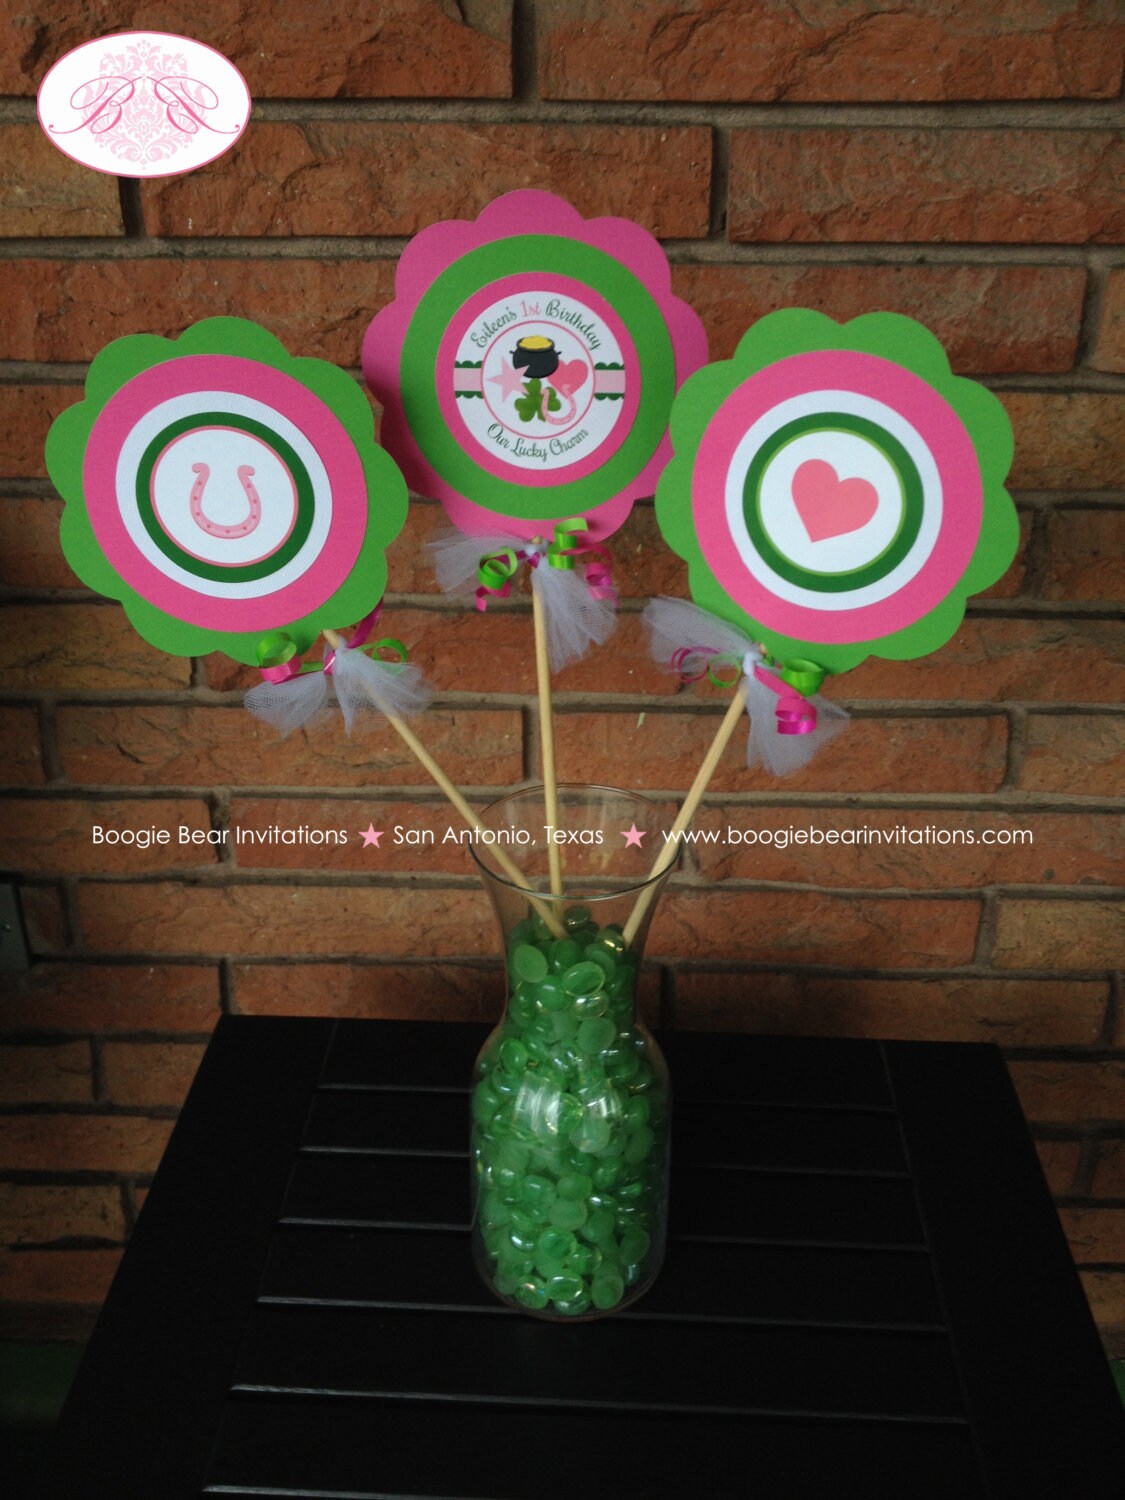 Lucky Charm Birthday Party Centerpiece Set Pink St. Patrick's Day Green Shamrock 4 Leaf Clover Display Boogie Bear Invitations Eileen Theme